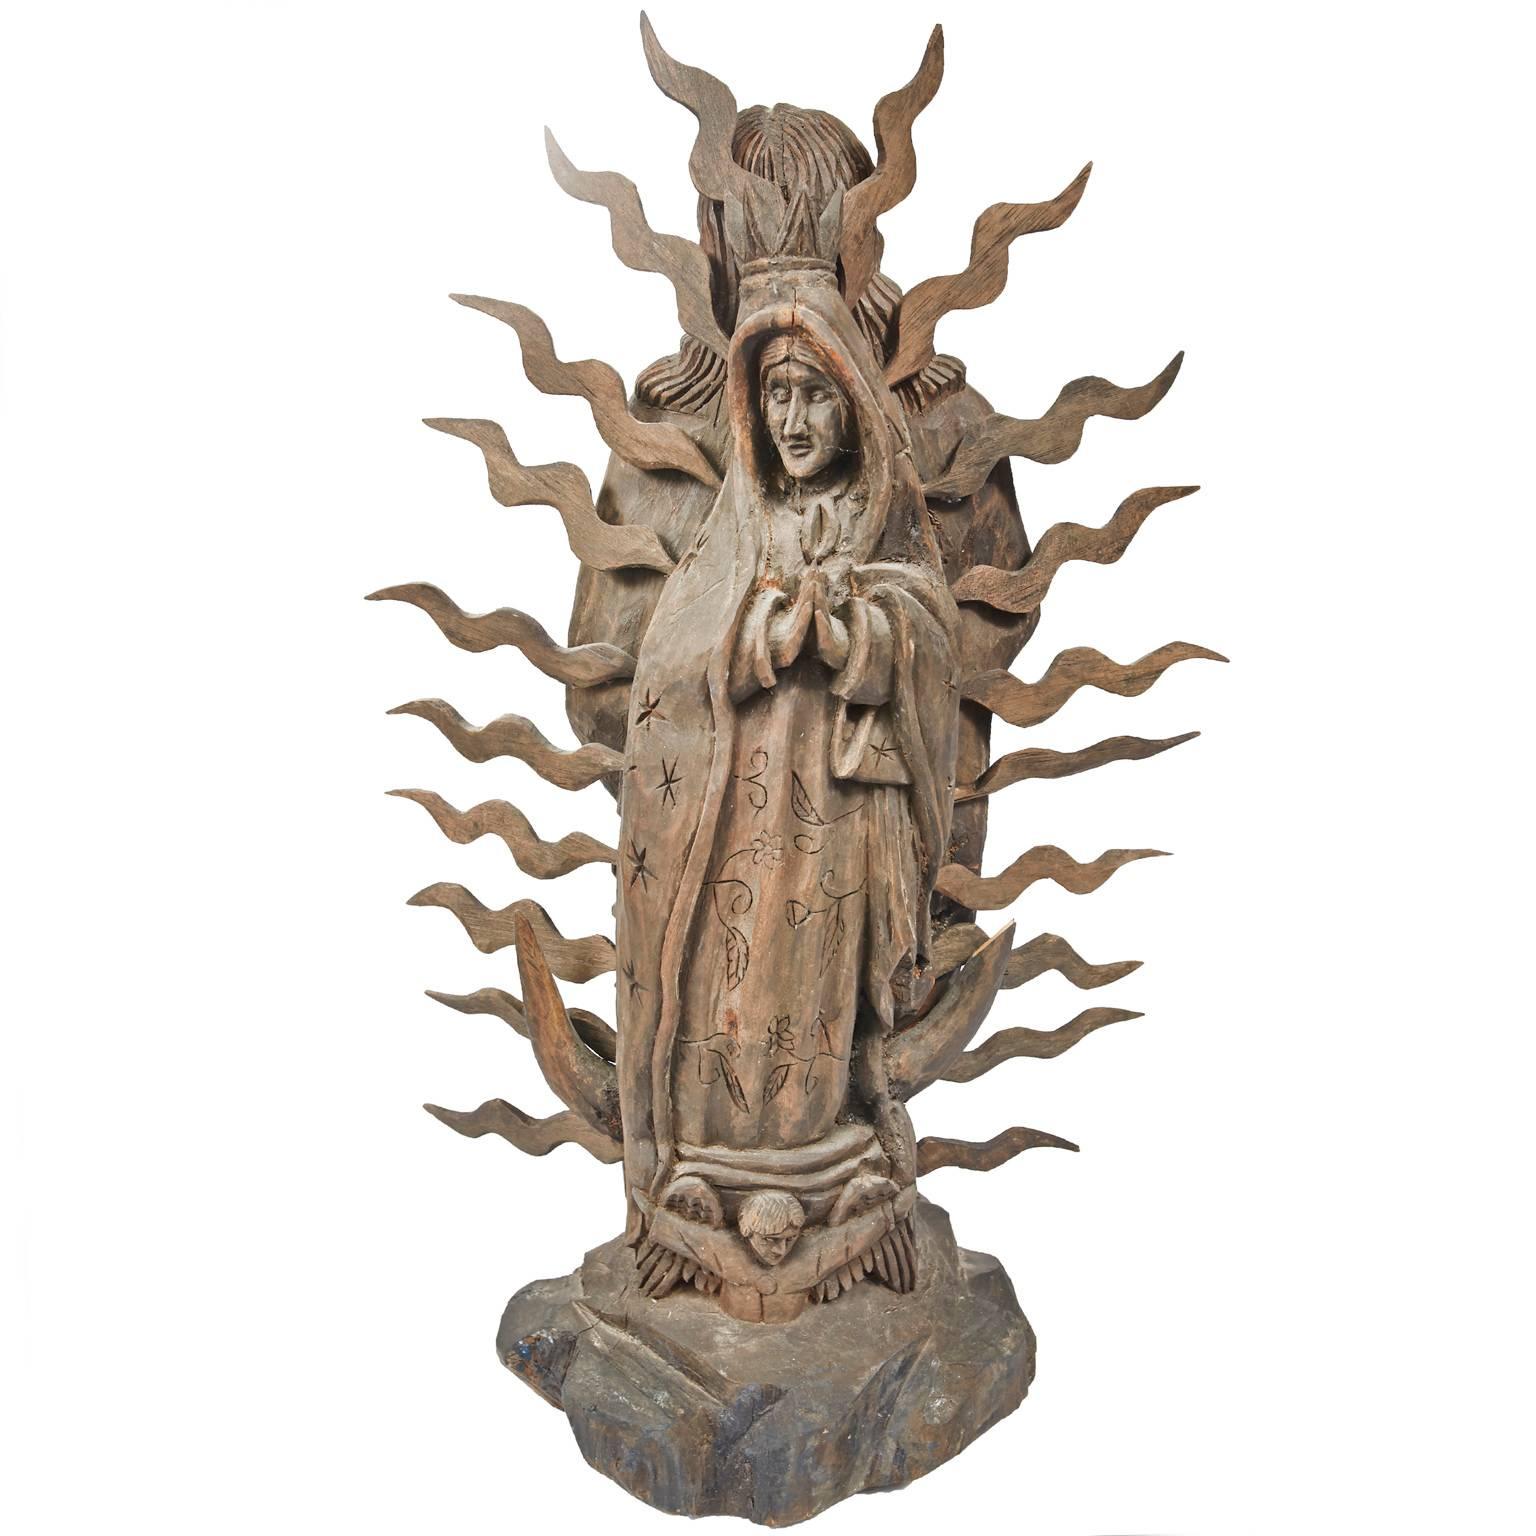 Unique two-sided hand-carved statue depicting the Sacred Heart of Jesus and the other side, The Virgin of Guadalupe. Removable carved pieces of wood surround the statue.